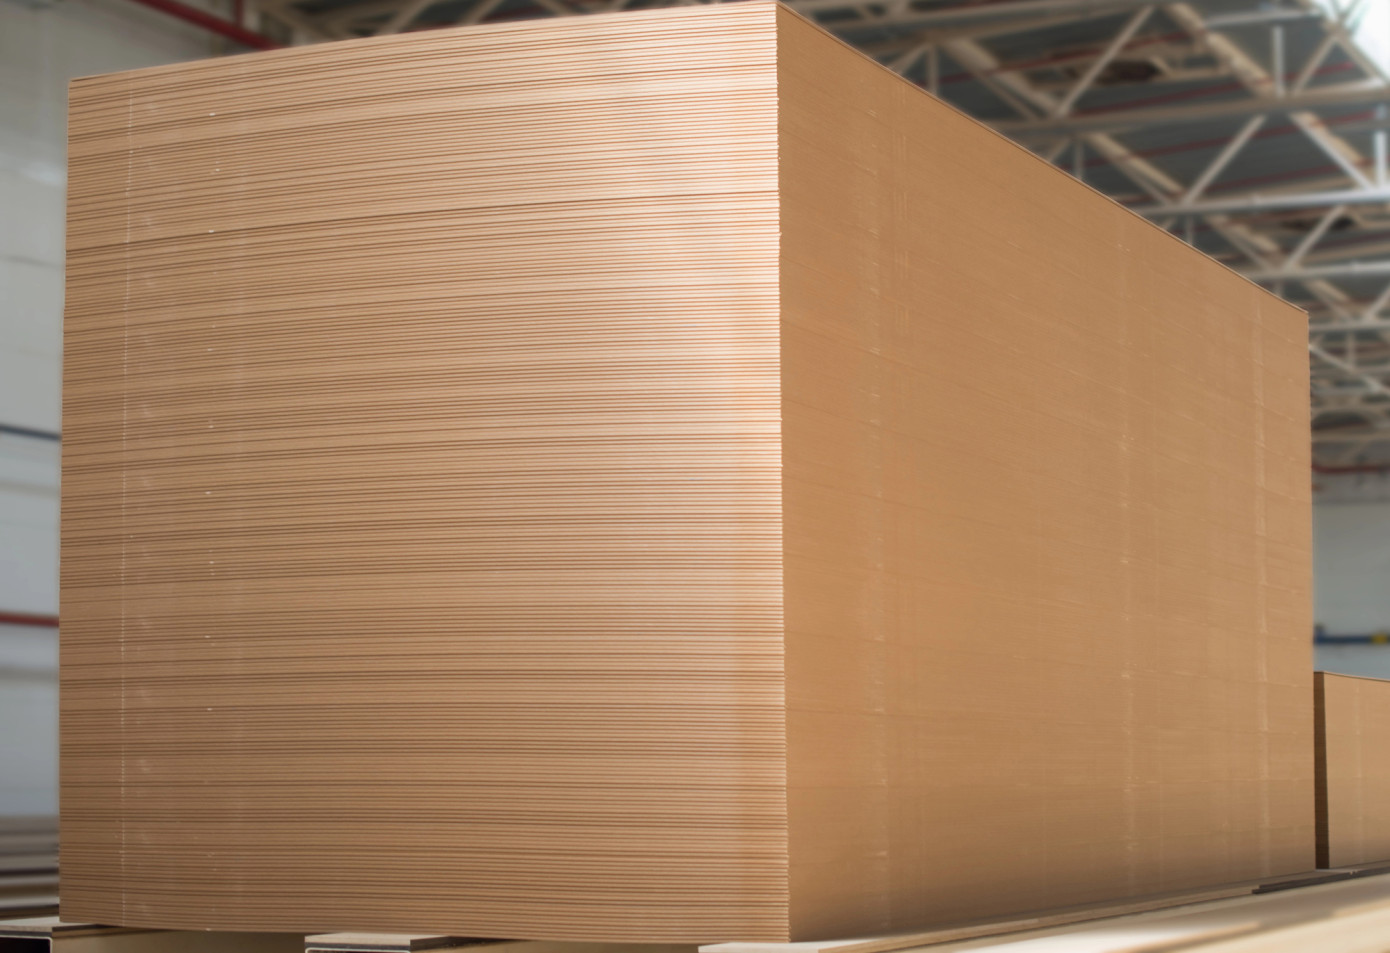 China’s exports of fiberboard expand 27% in April